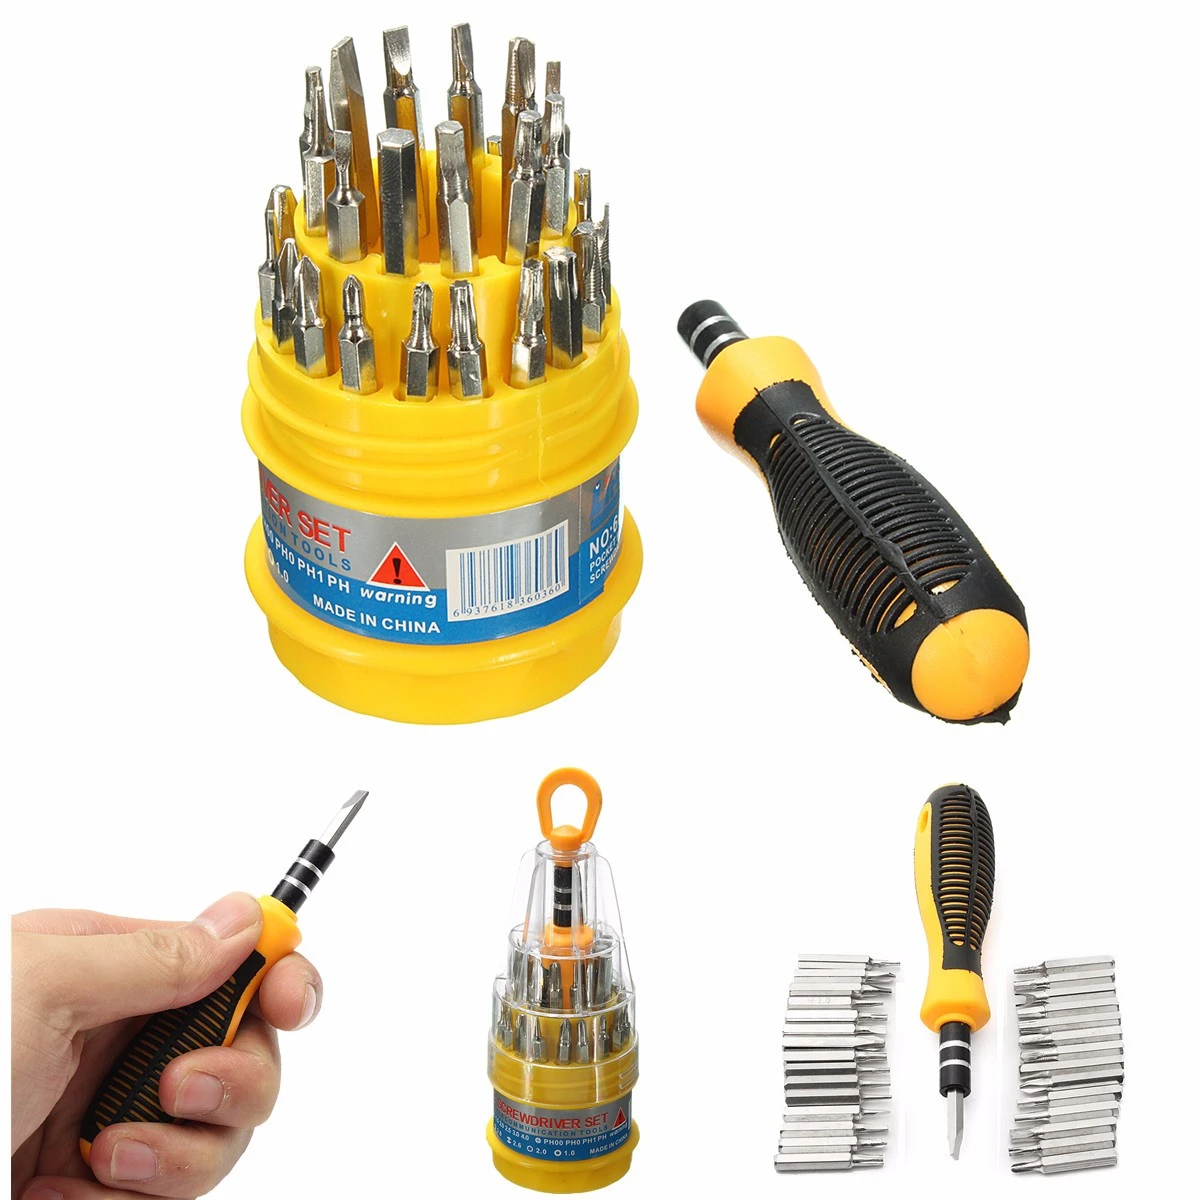 31 in 1 Screwdriver Set Mechanic Repair Tool Kit for PDA Cell Phone Watch PSP